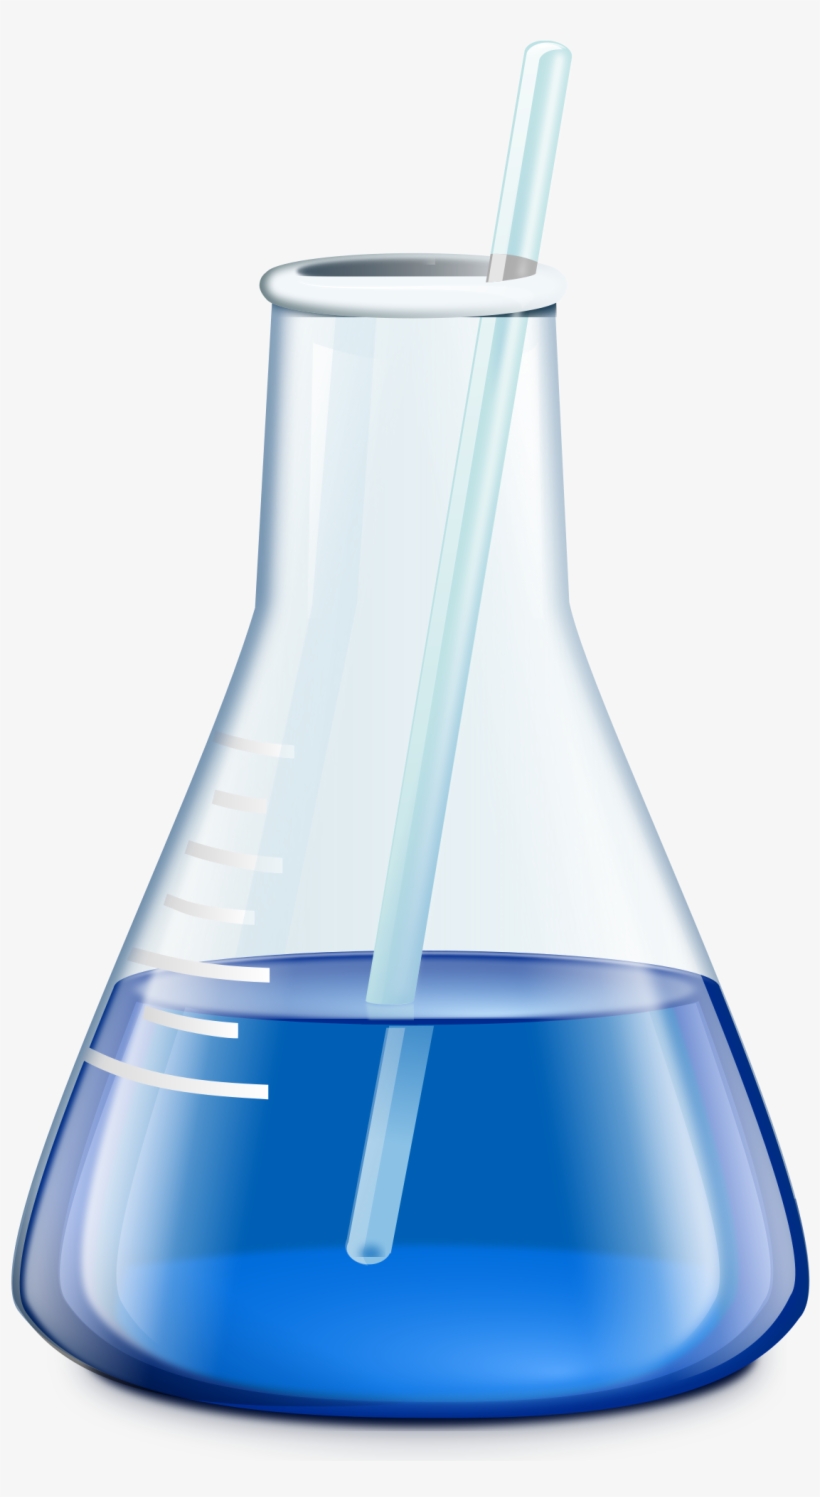 Open - Chemistry Folder Icon, transparent png #5515123